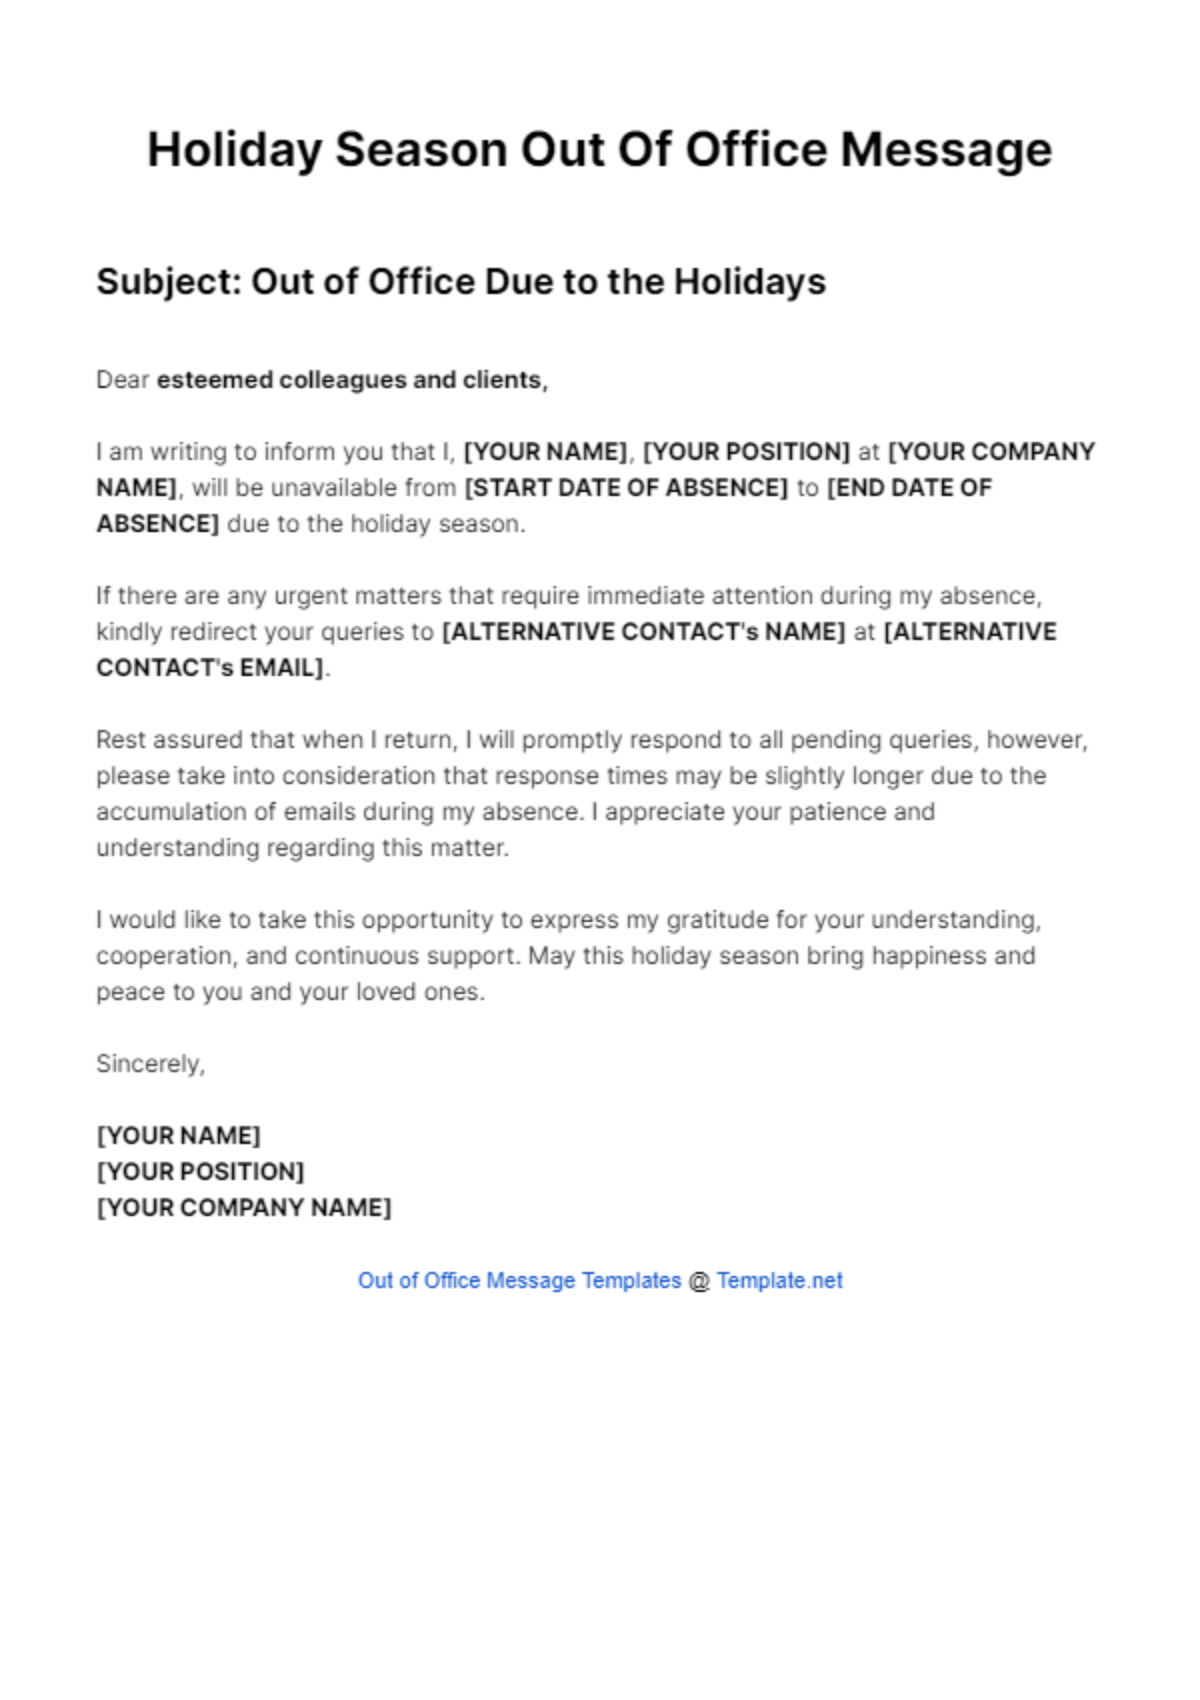 Holiday Season Out Of Office Message Template